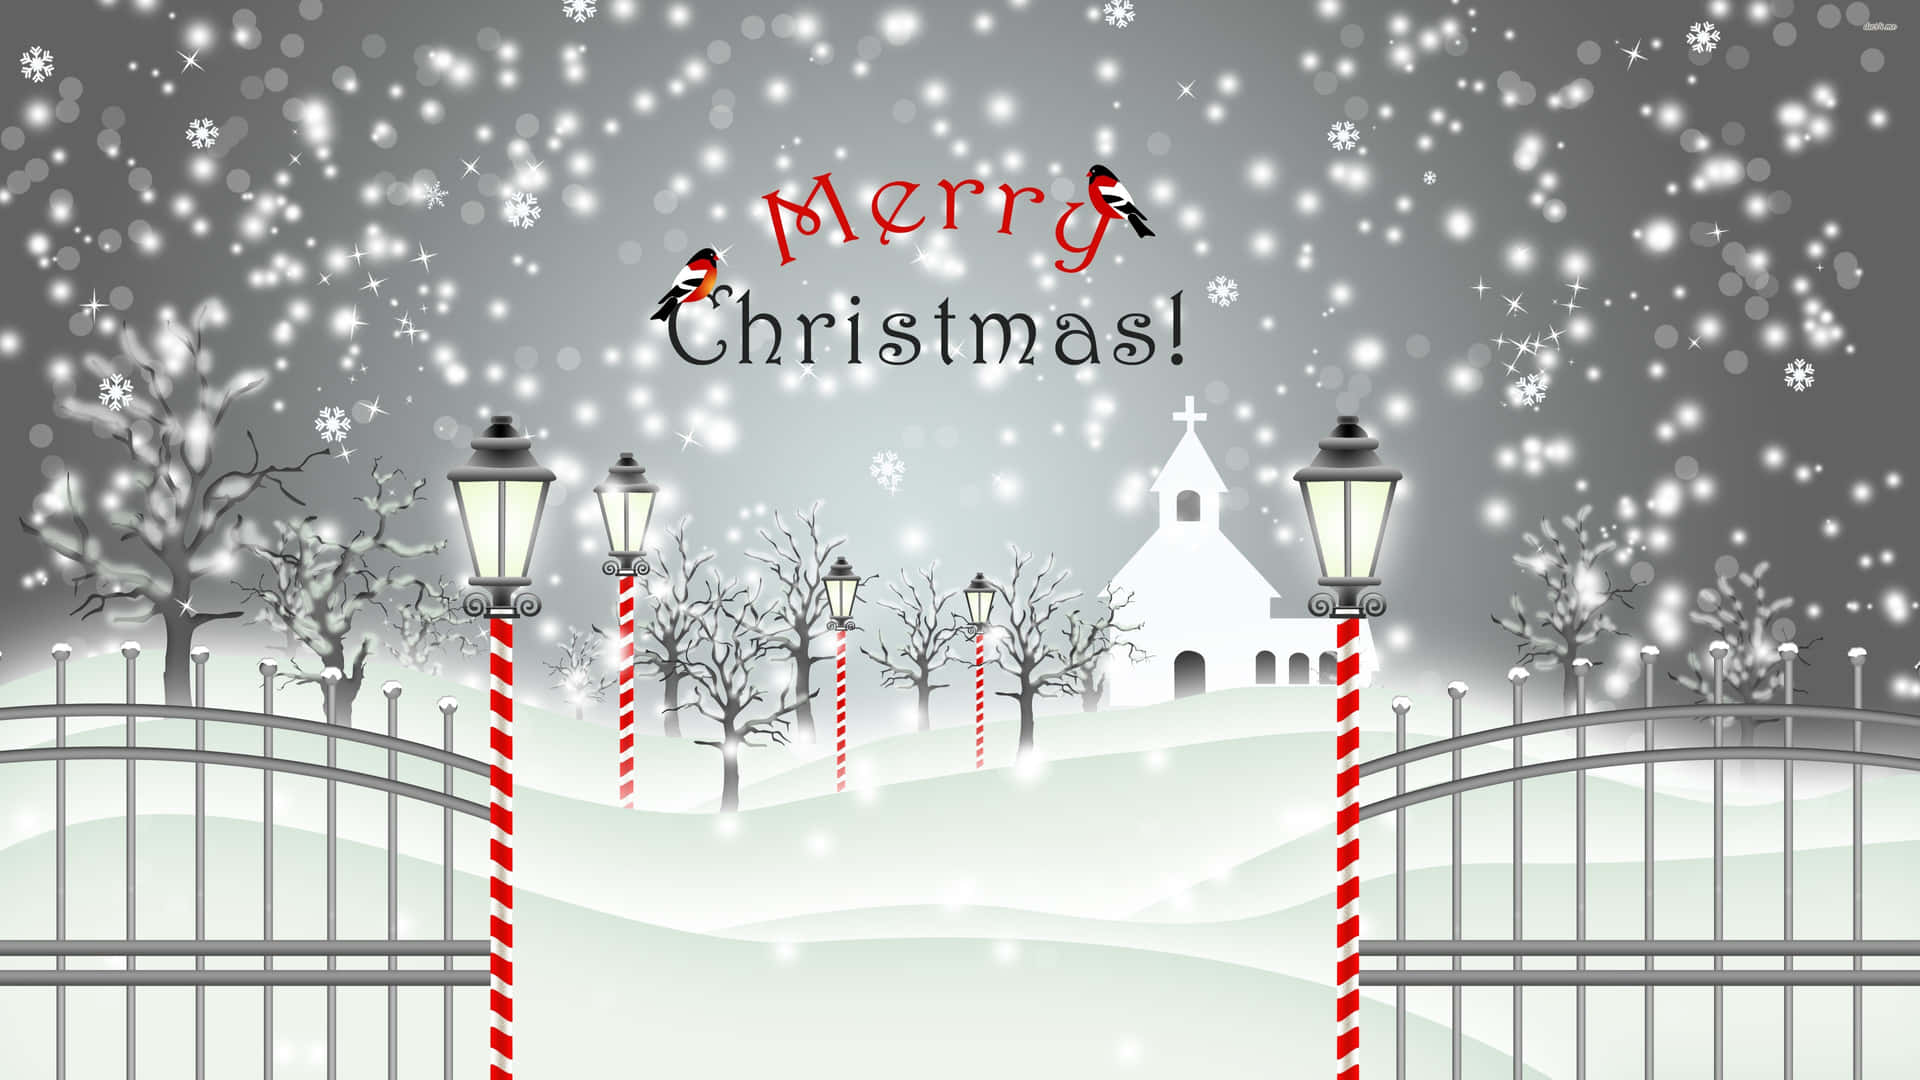 Celebrate the Christmas season in style with a magical winter wonderland. Wallpaper